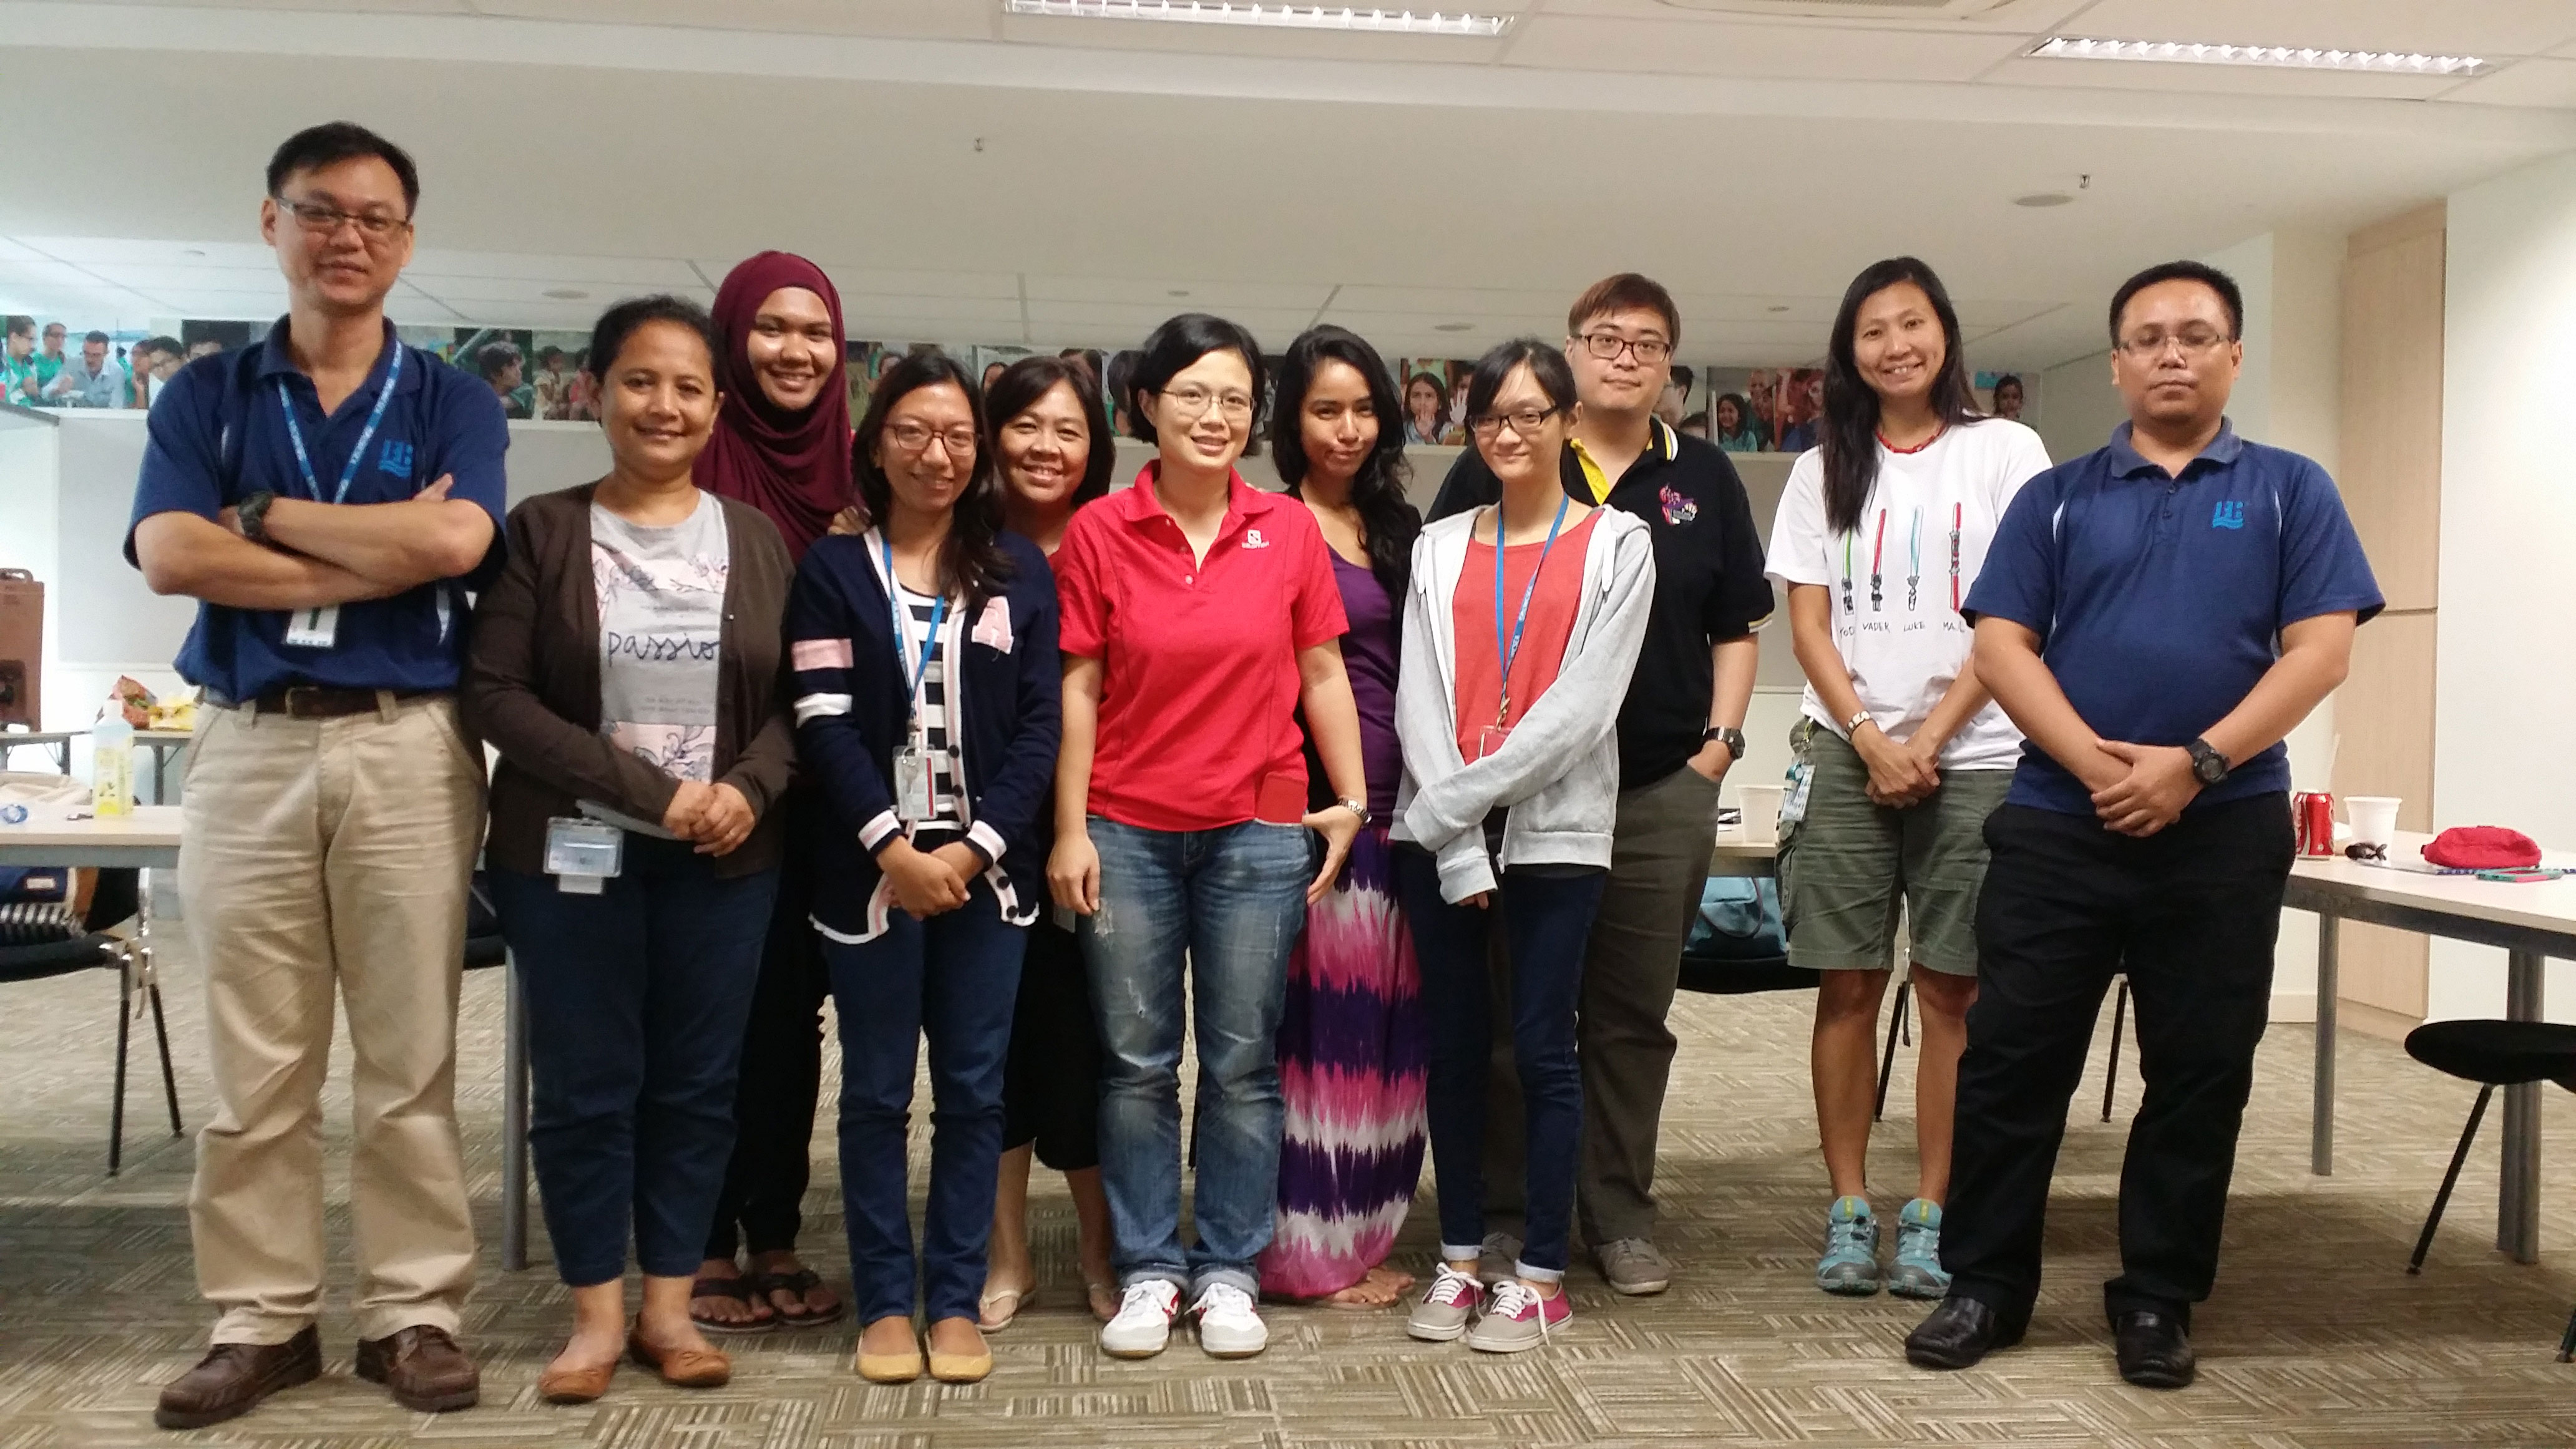 Adult First Aid Course (CPR, AED), Singapore, 14-16 Oct 2015